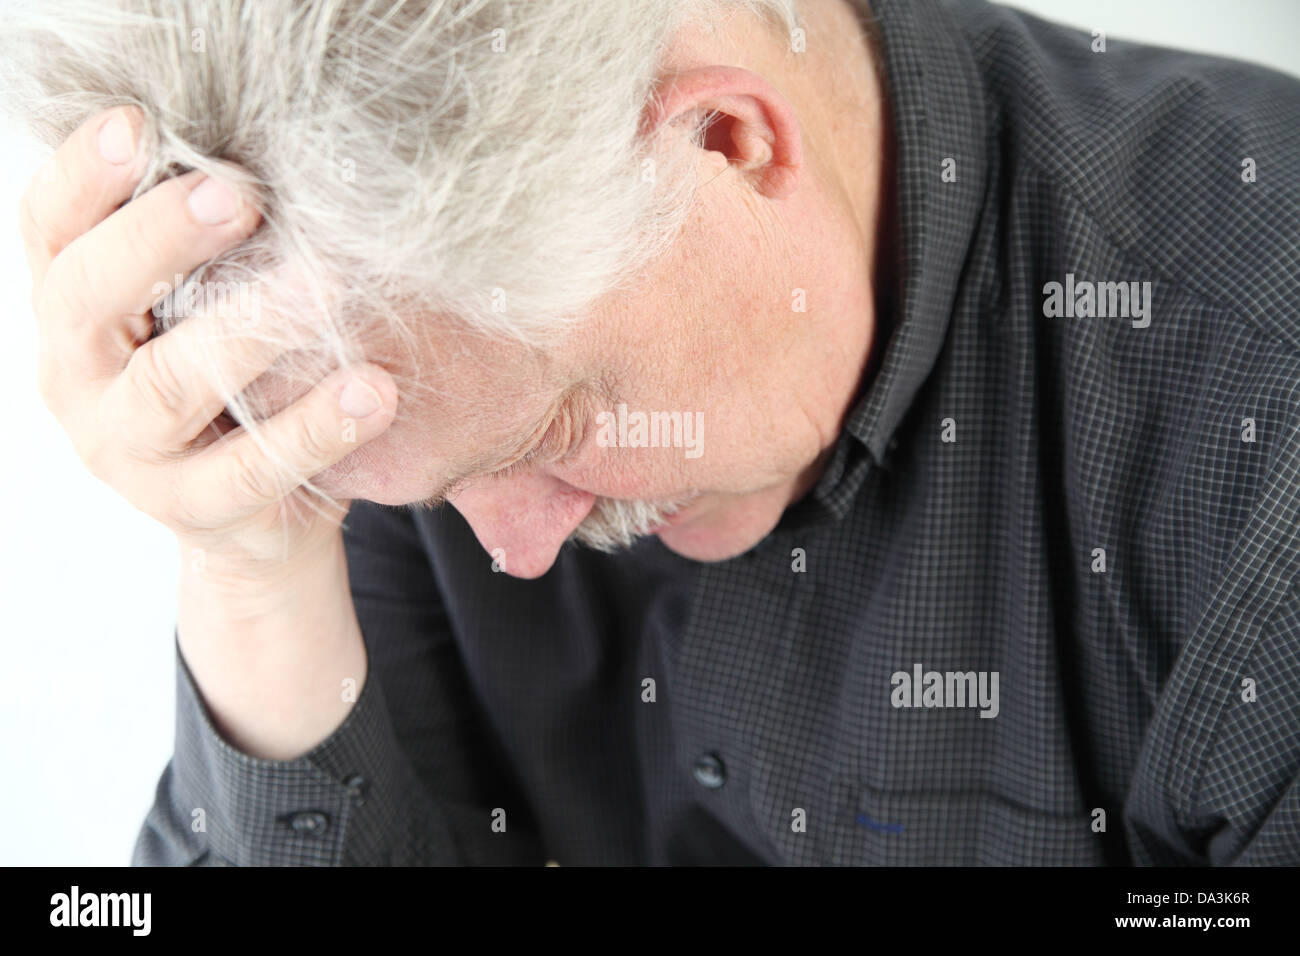 senior man bent over with grief or depression Stock Photo